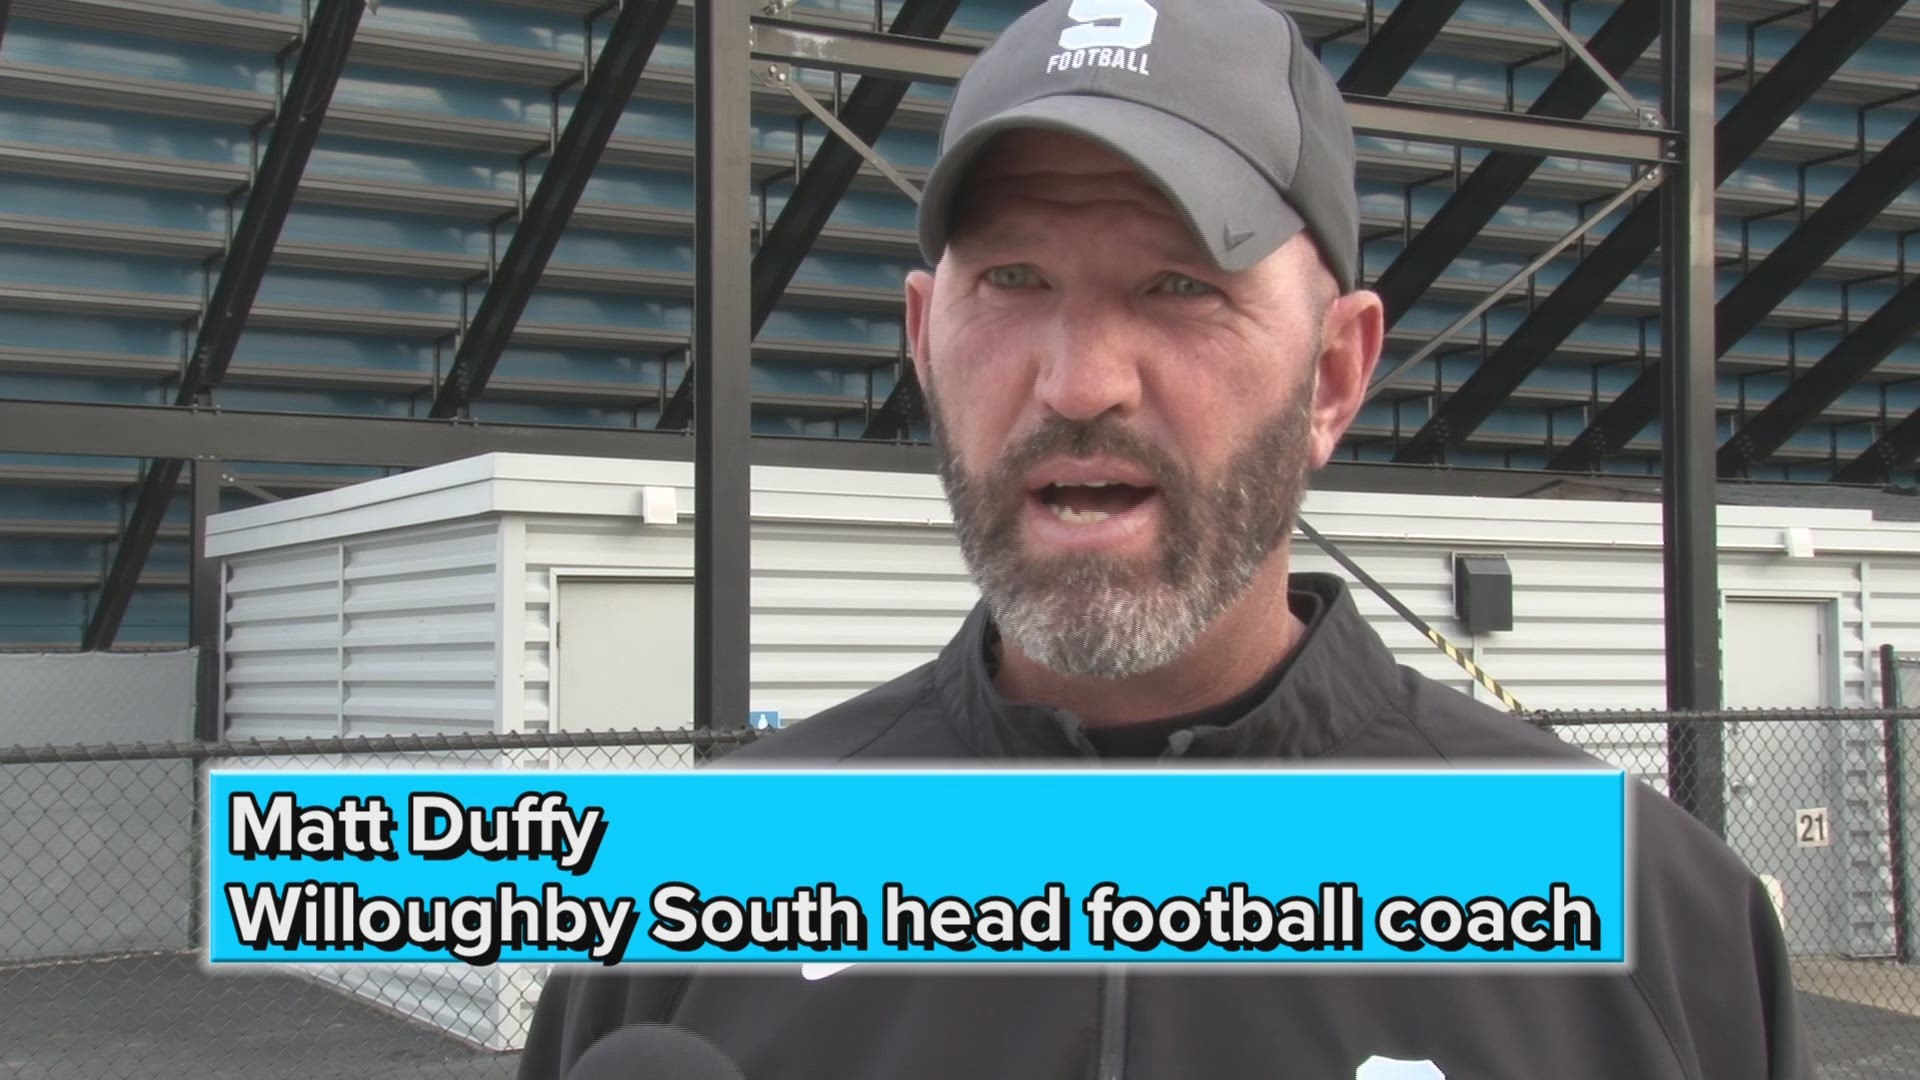 Hunt buys tickets for entire Willoughby South football team